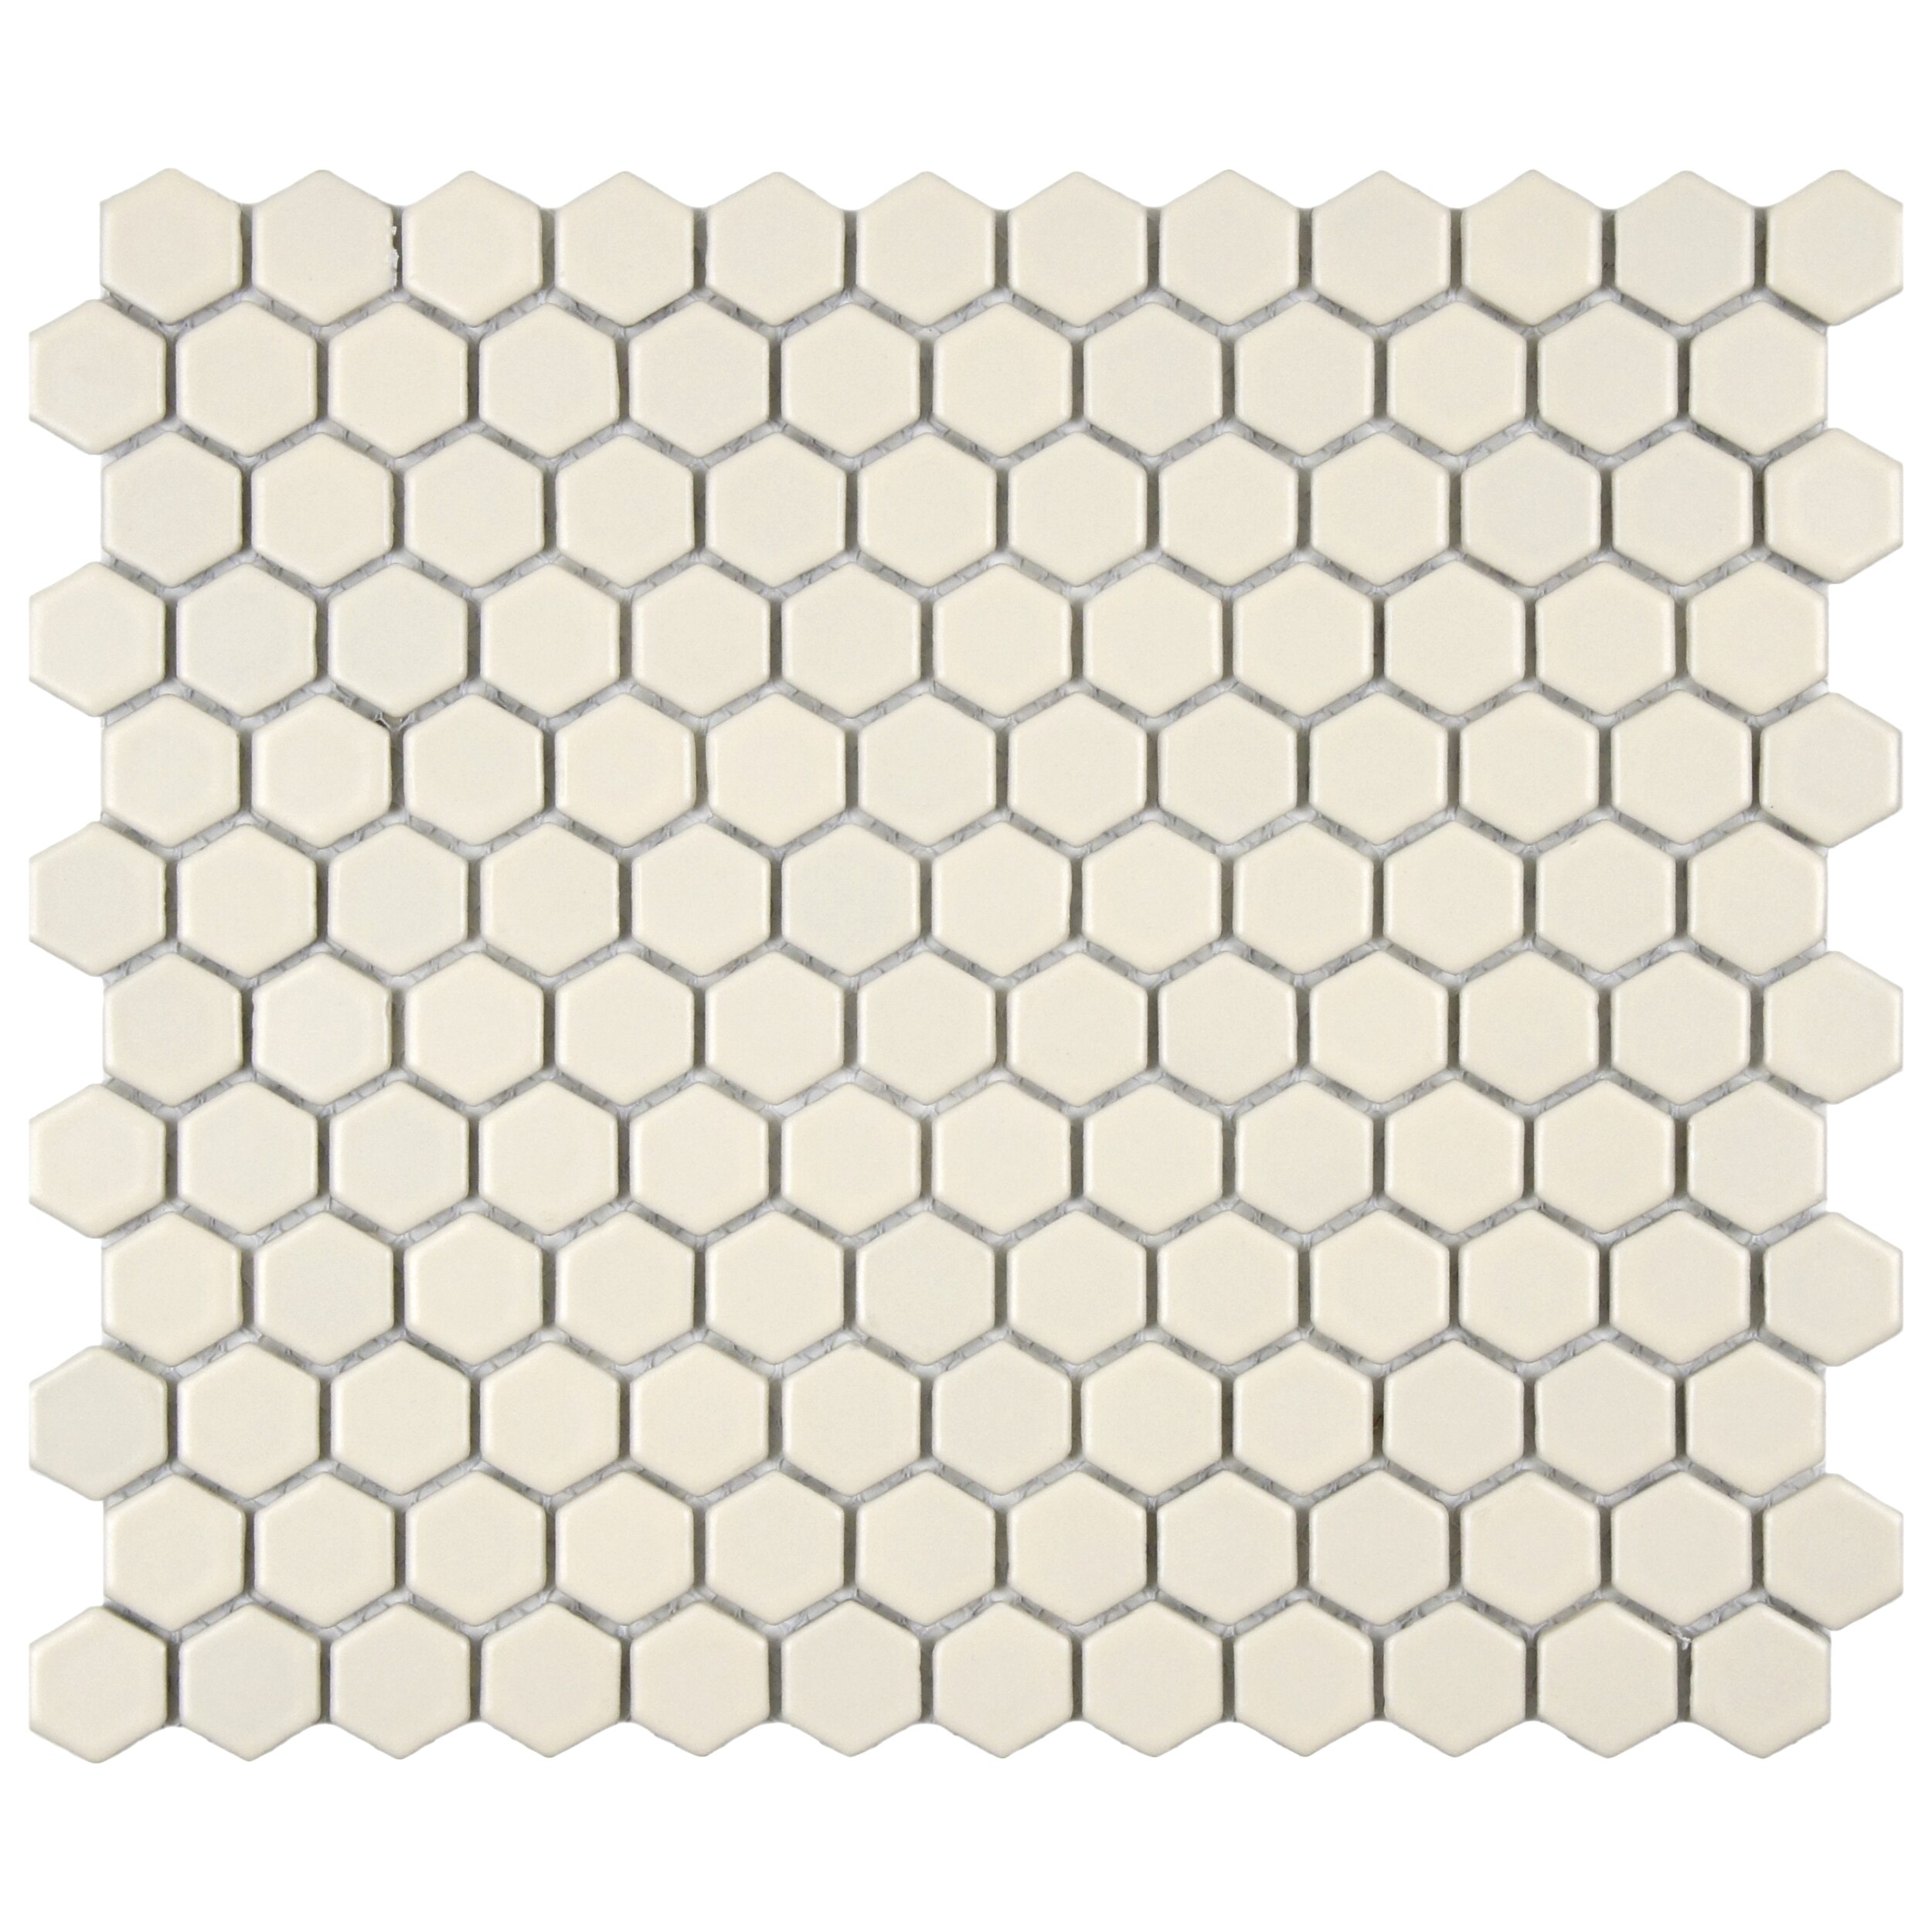 Somertile 10.25x11.75 in Victorian Hex Matte Biscuit Porcelain Mosaic Tiles (pack Of 10)